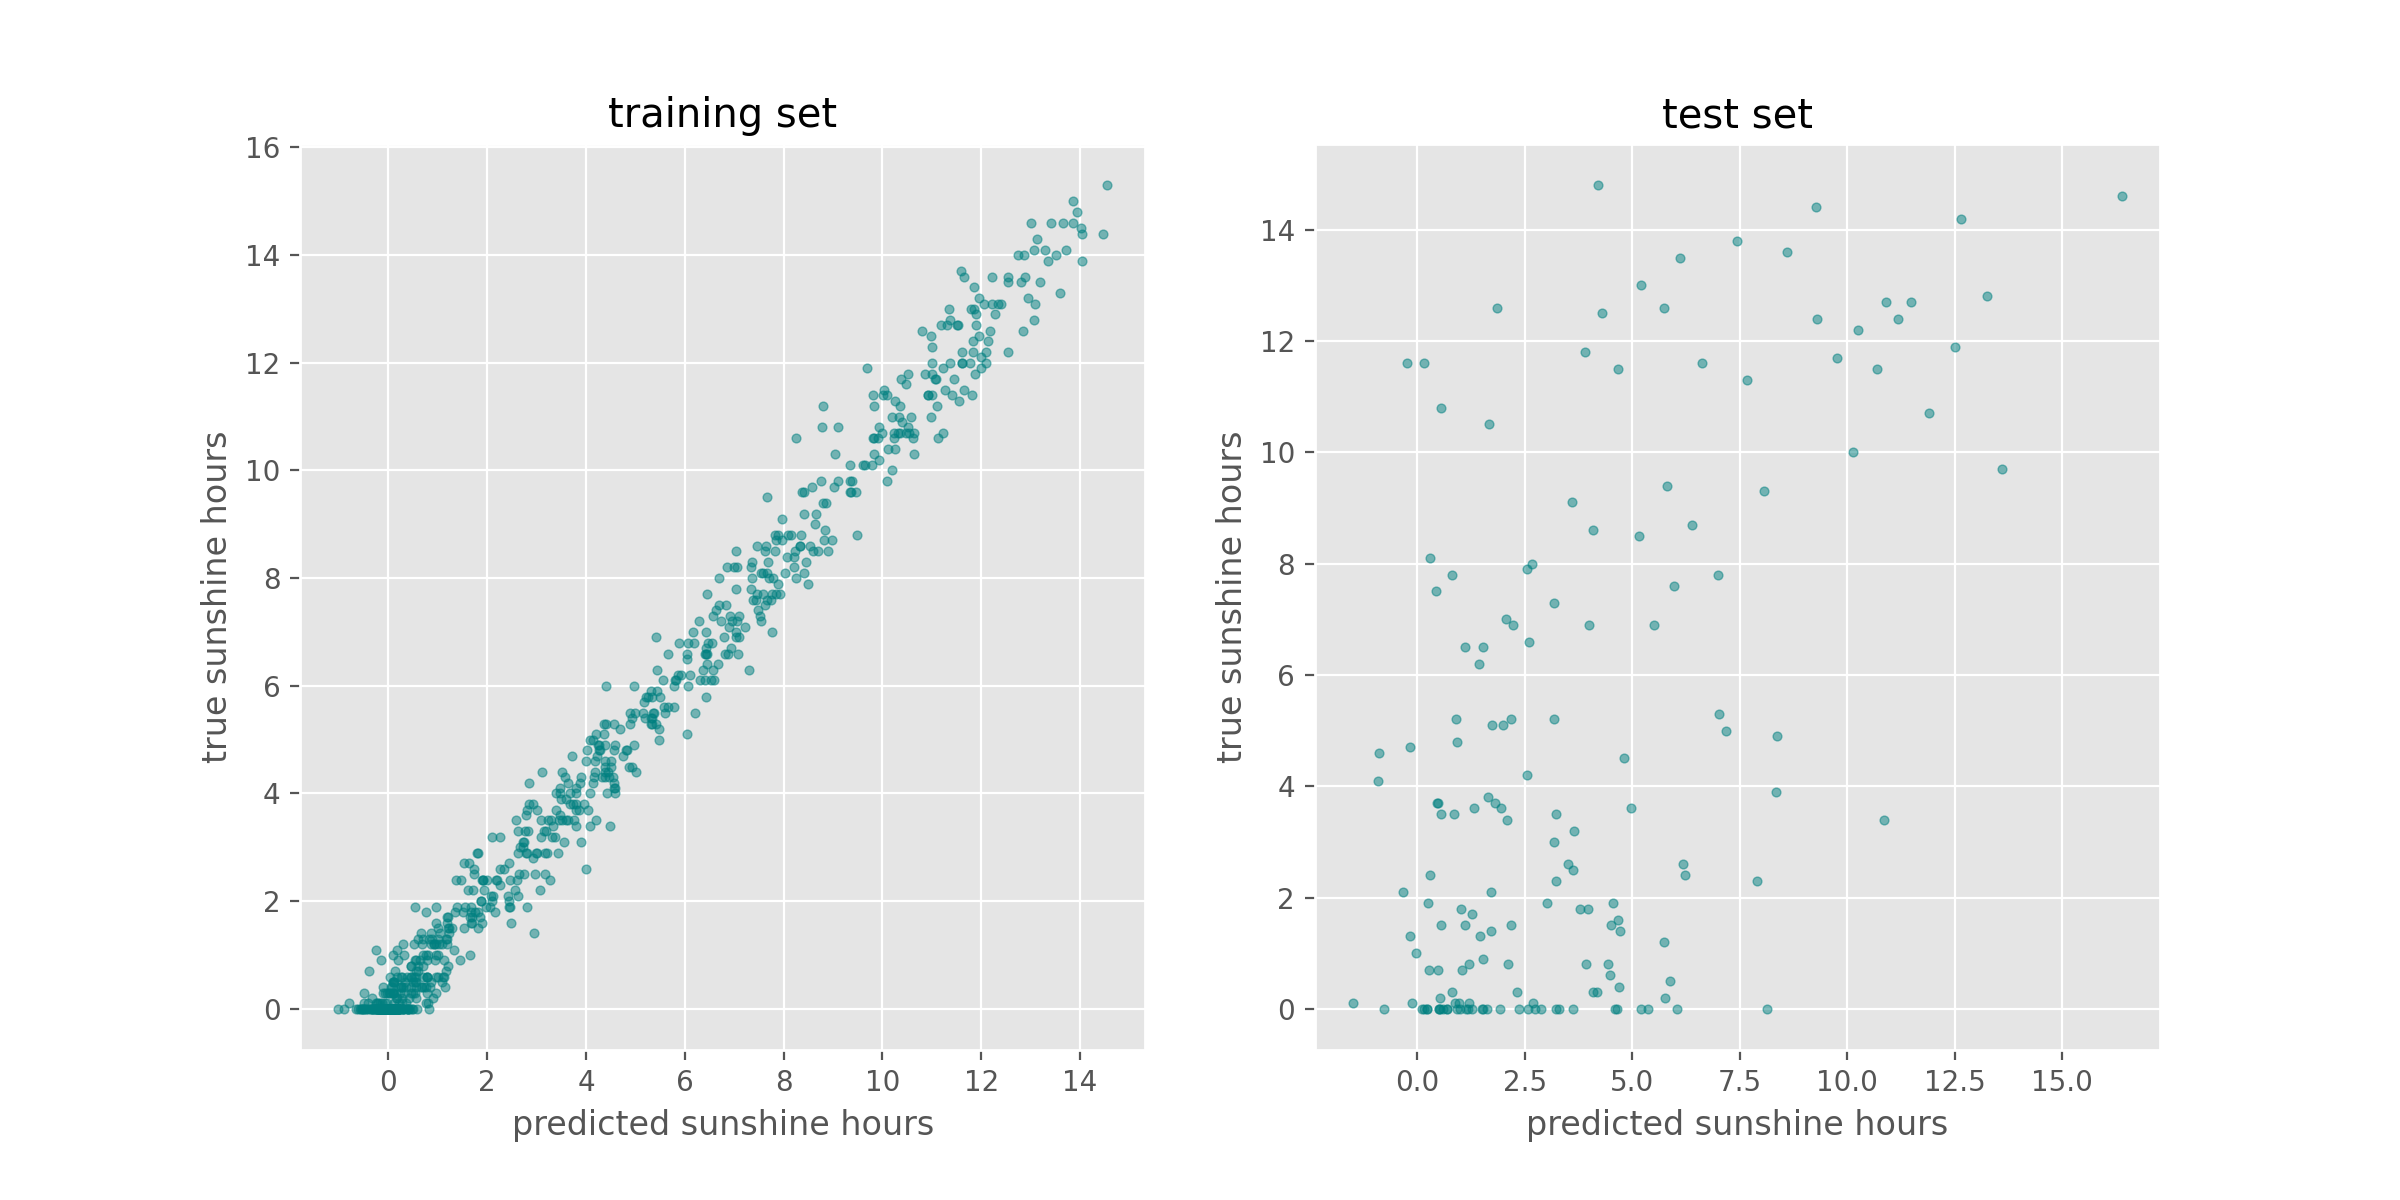 Scatter plot to evaluate training and test set